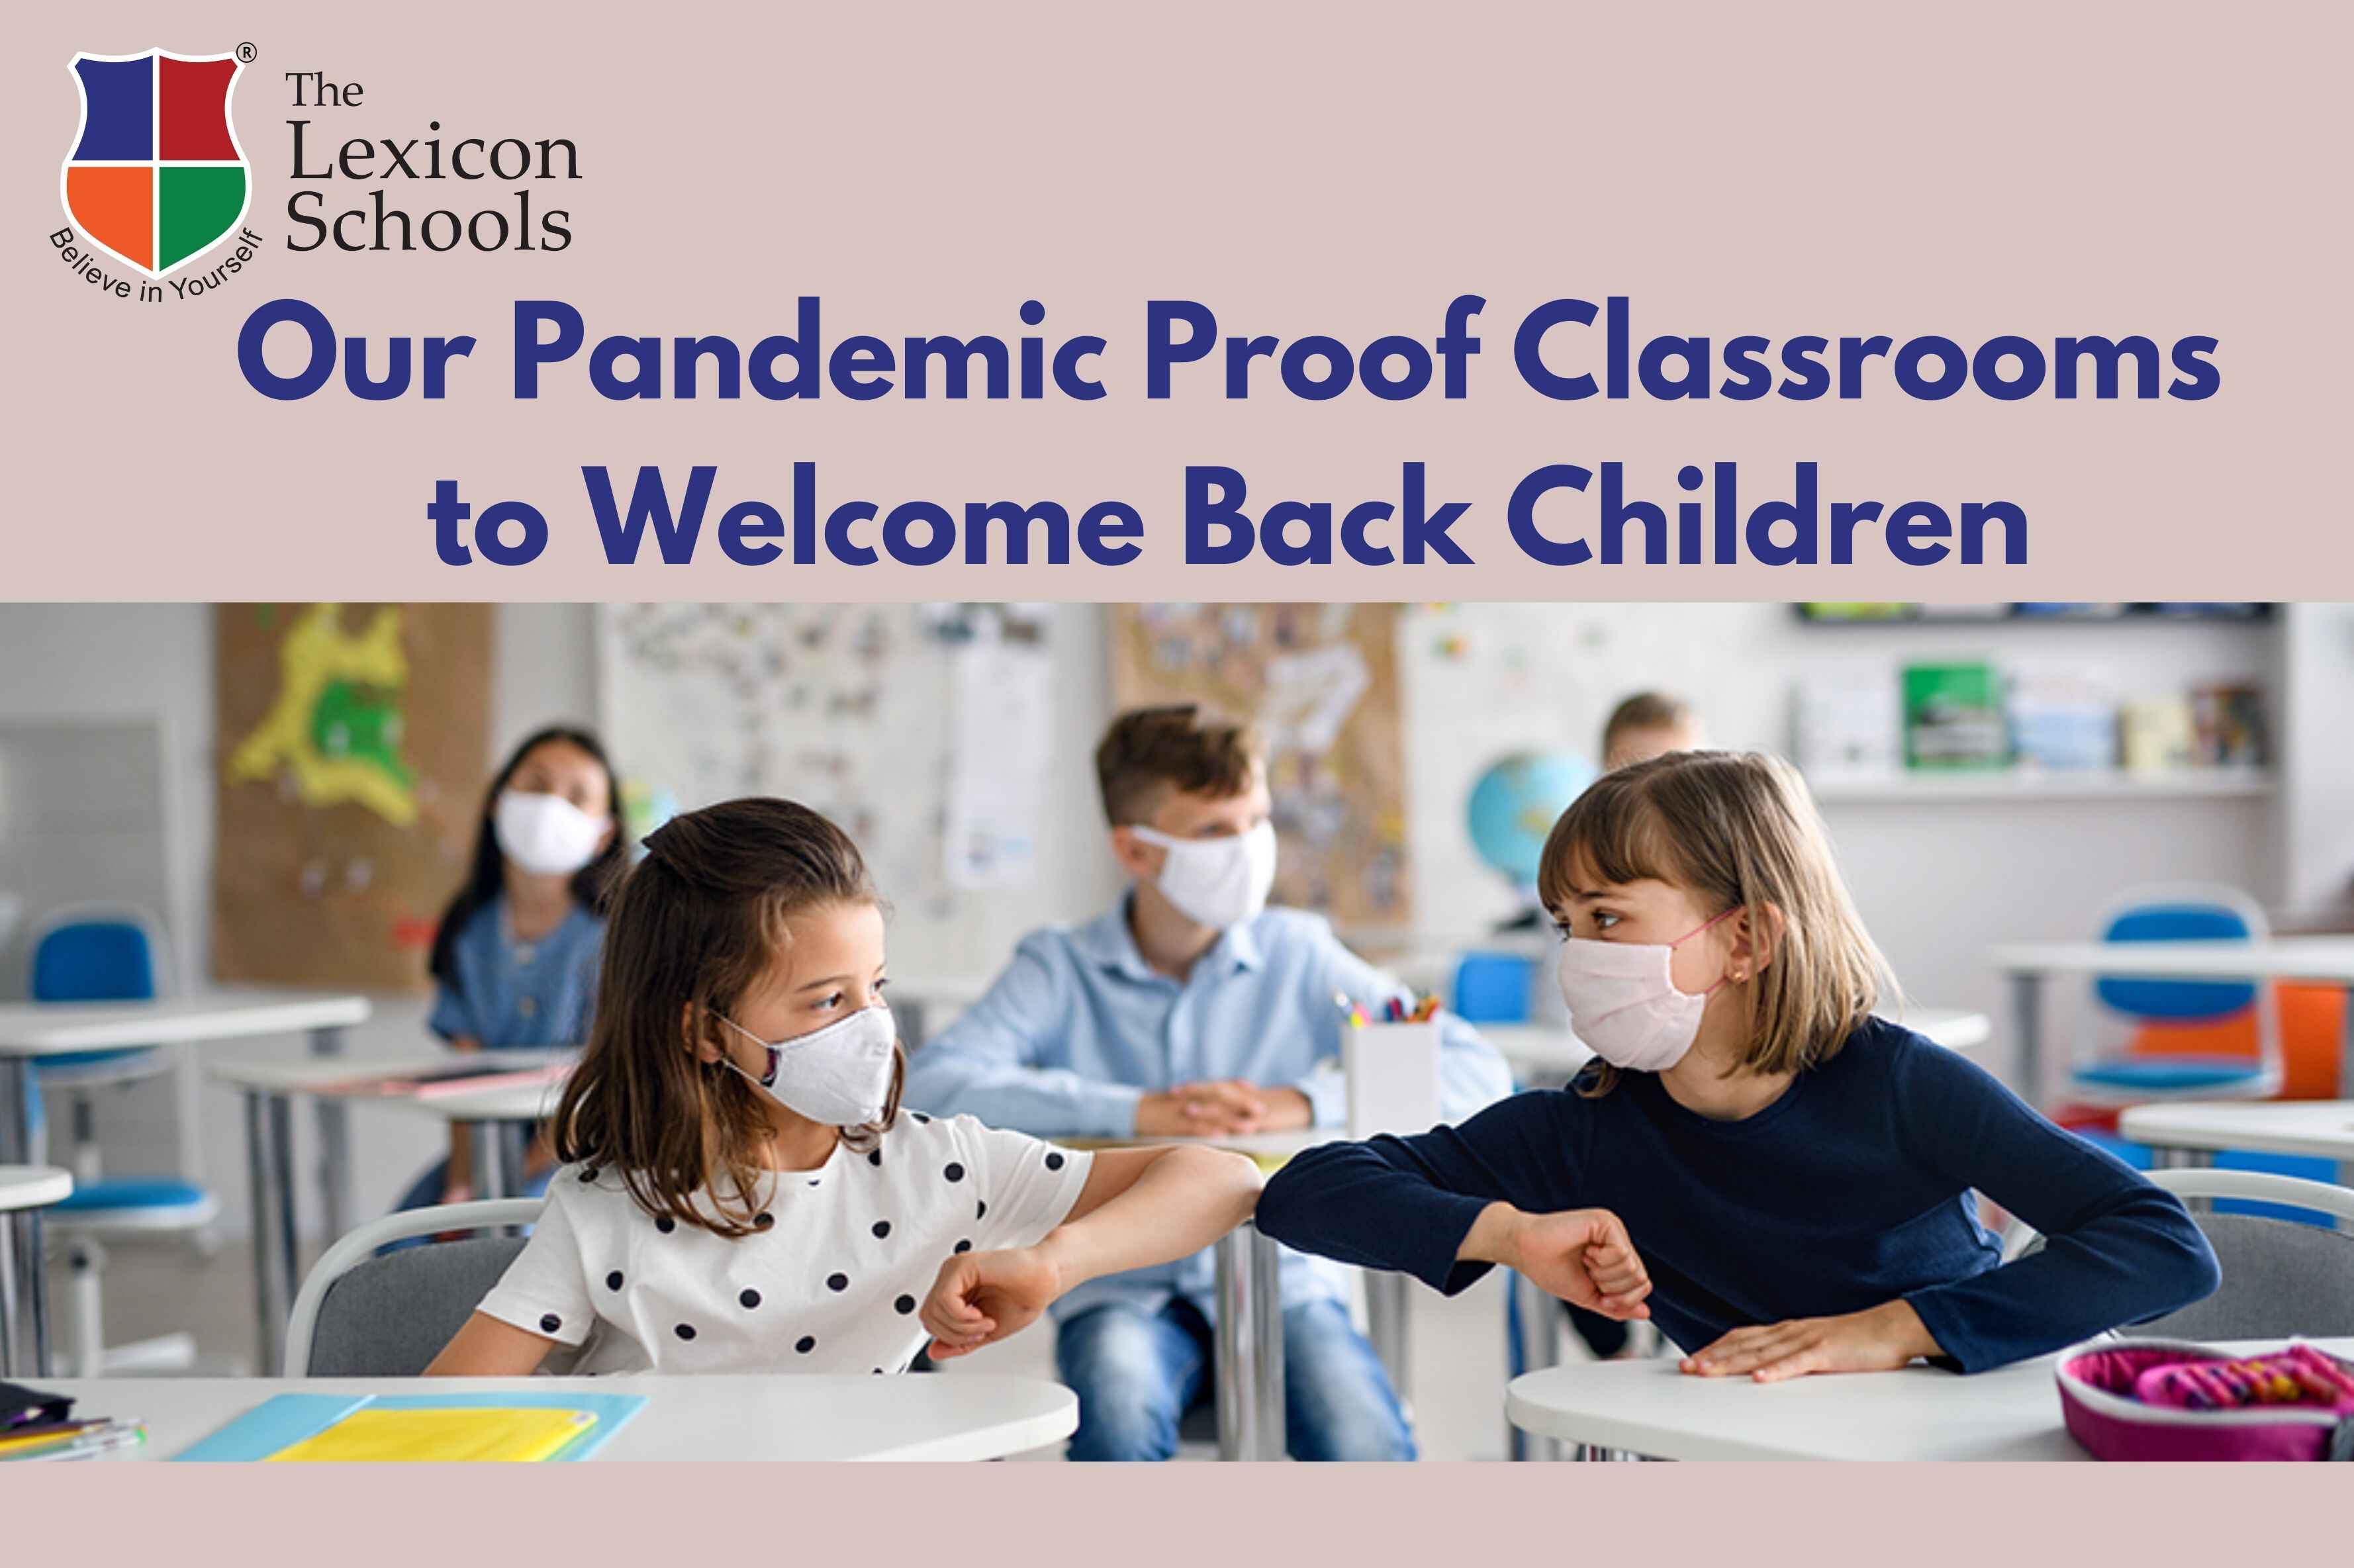 Our Pandemic Proof Classrooms to Welcome Back Children